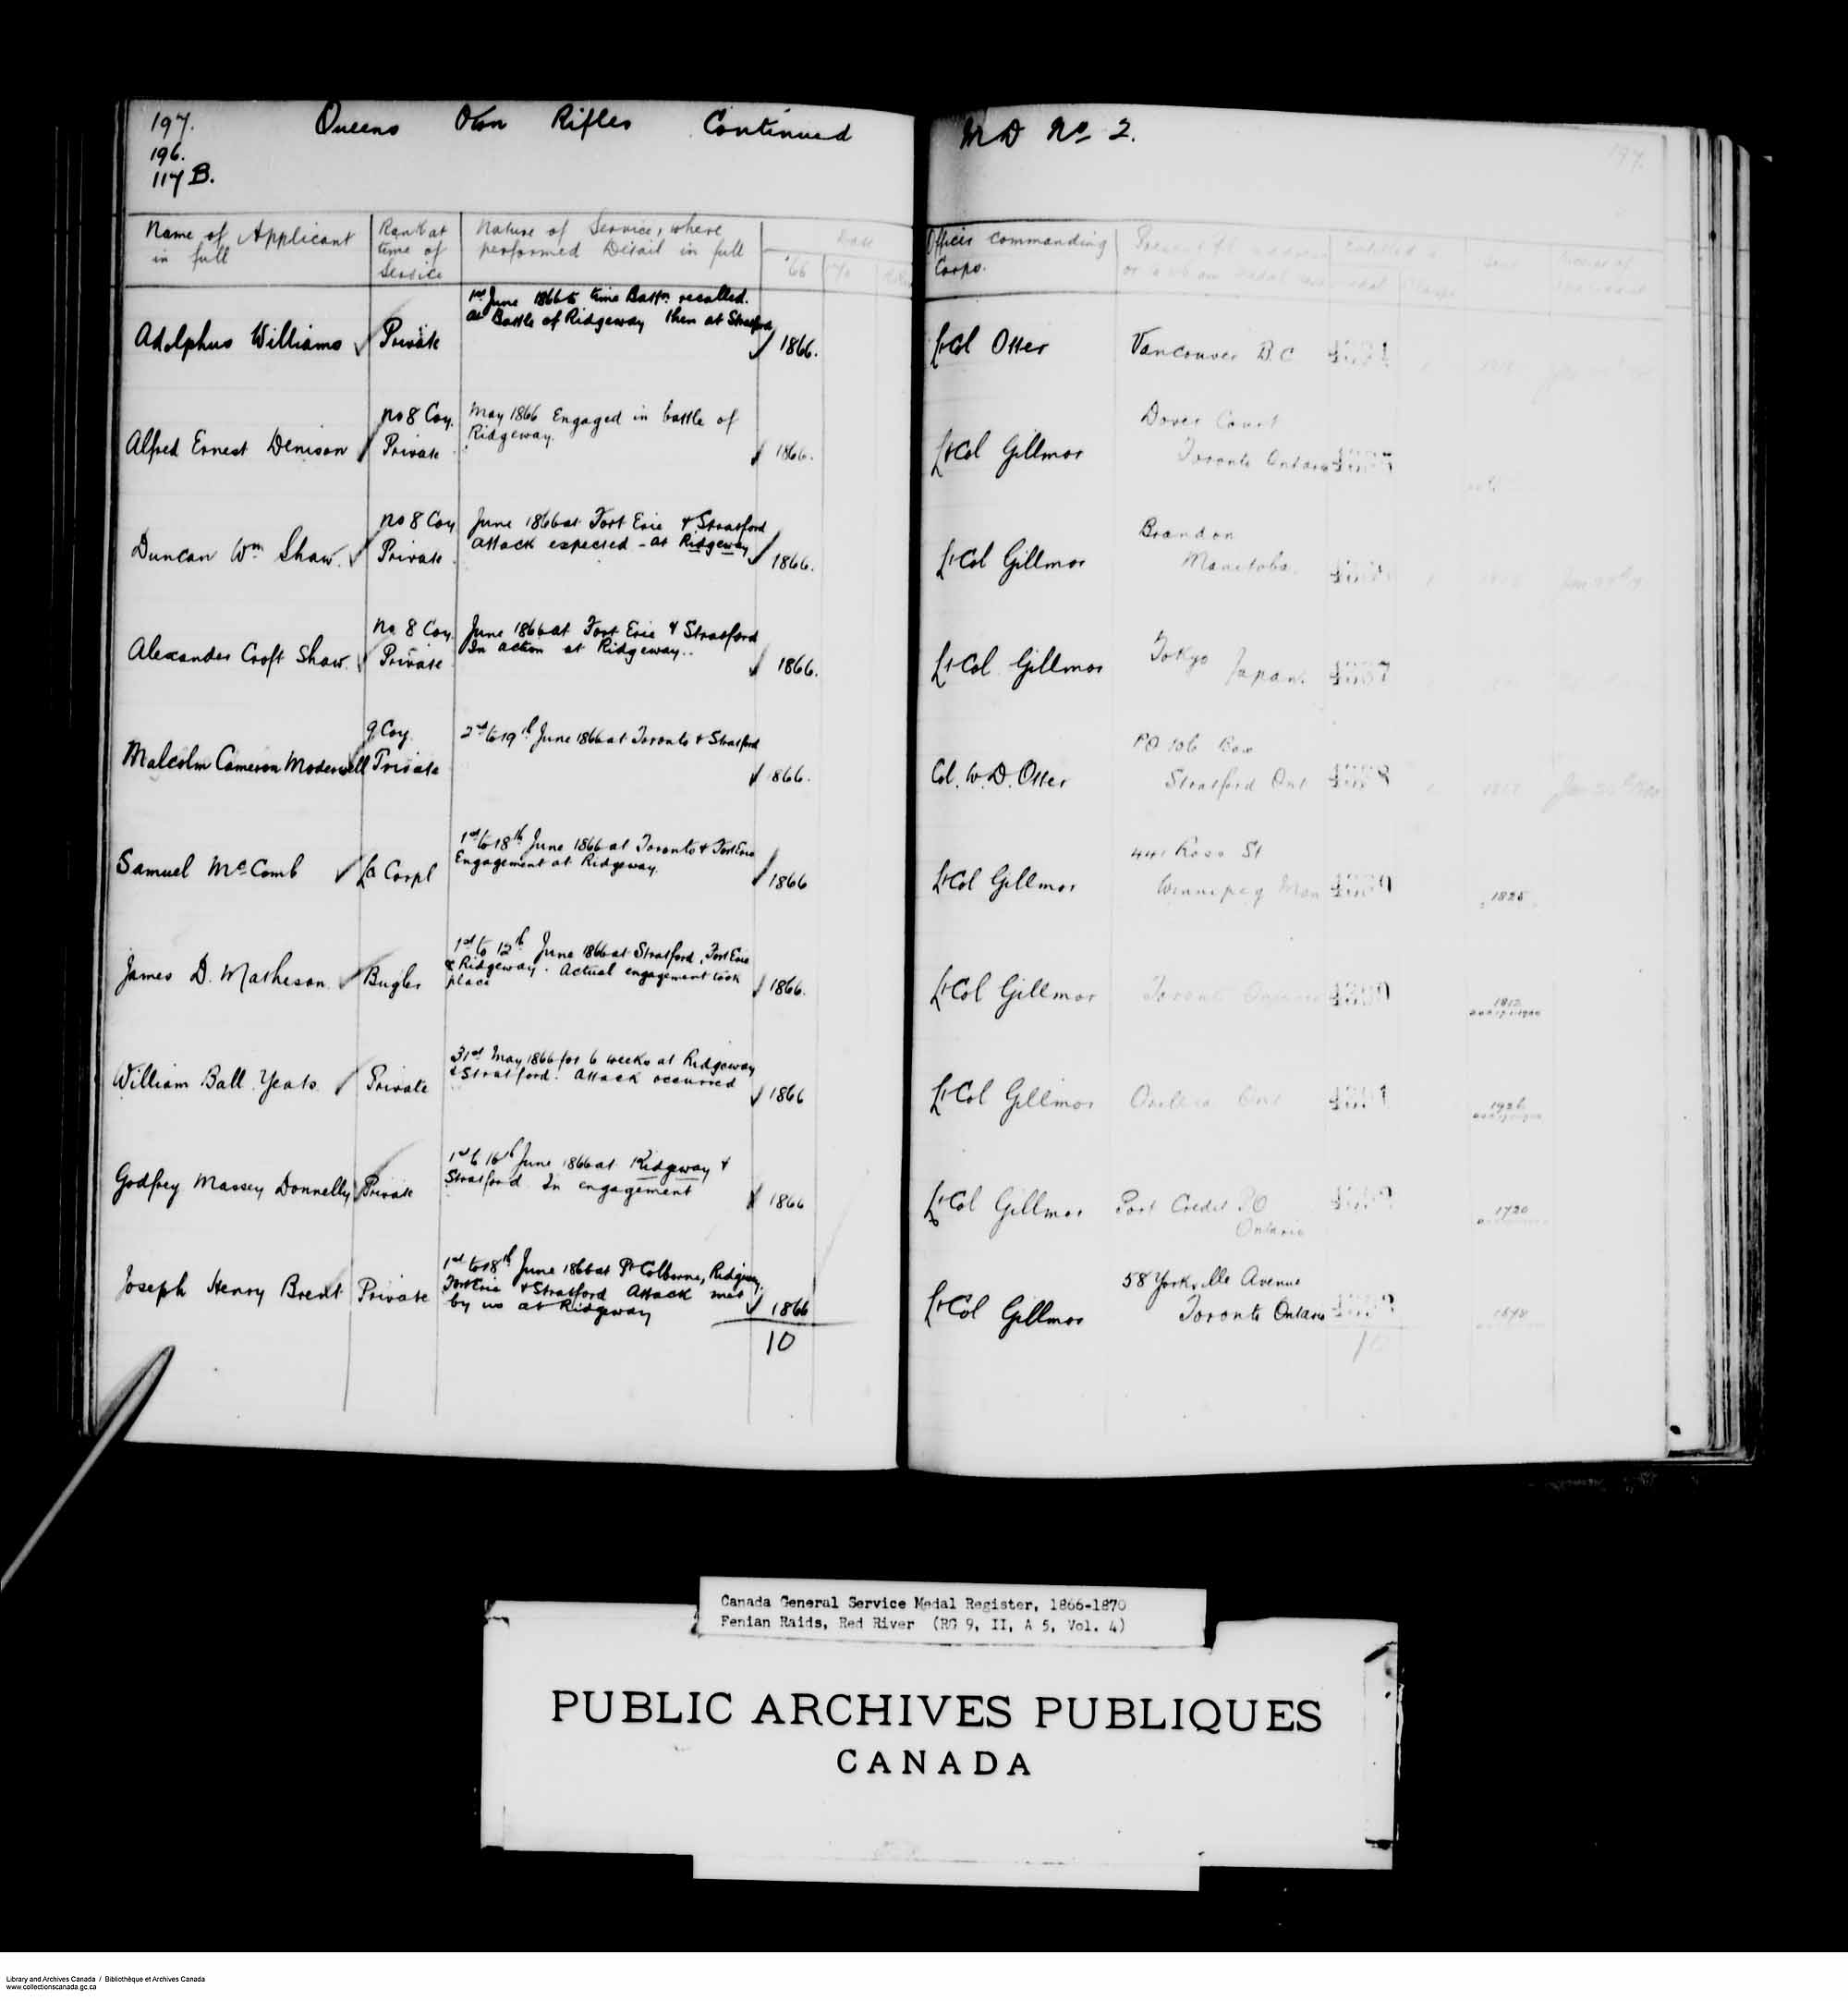 Digitized page of Medals, Honours and Awards for Image No.: e008681884